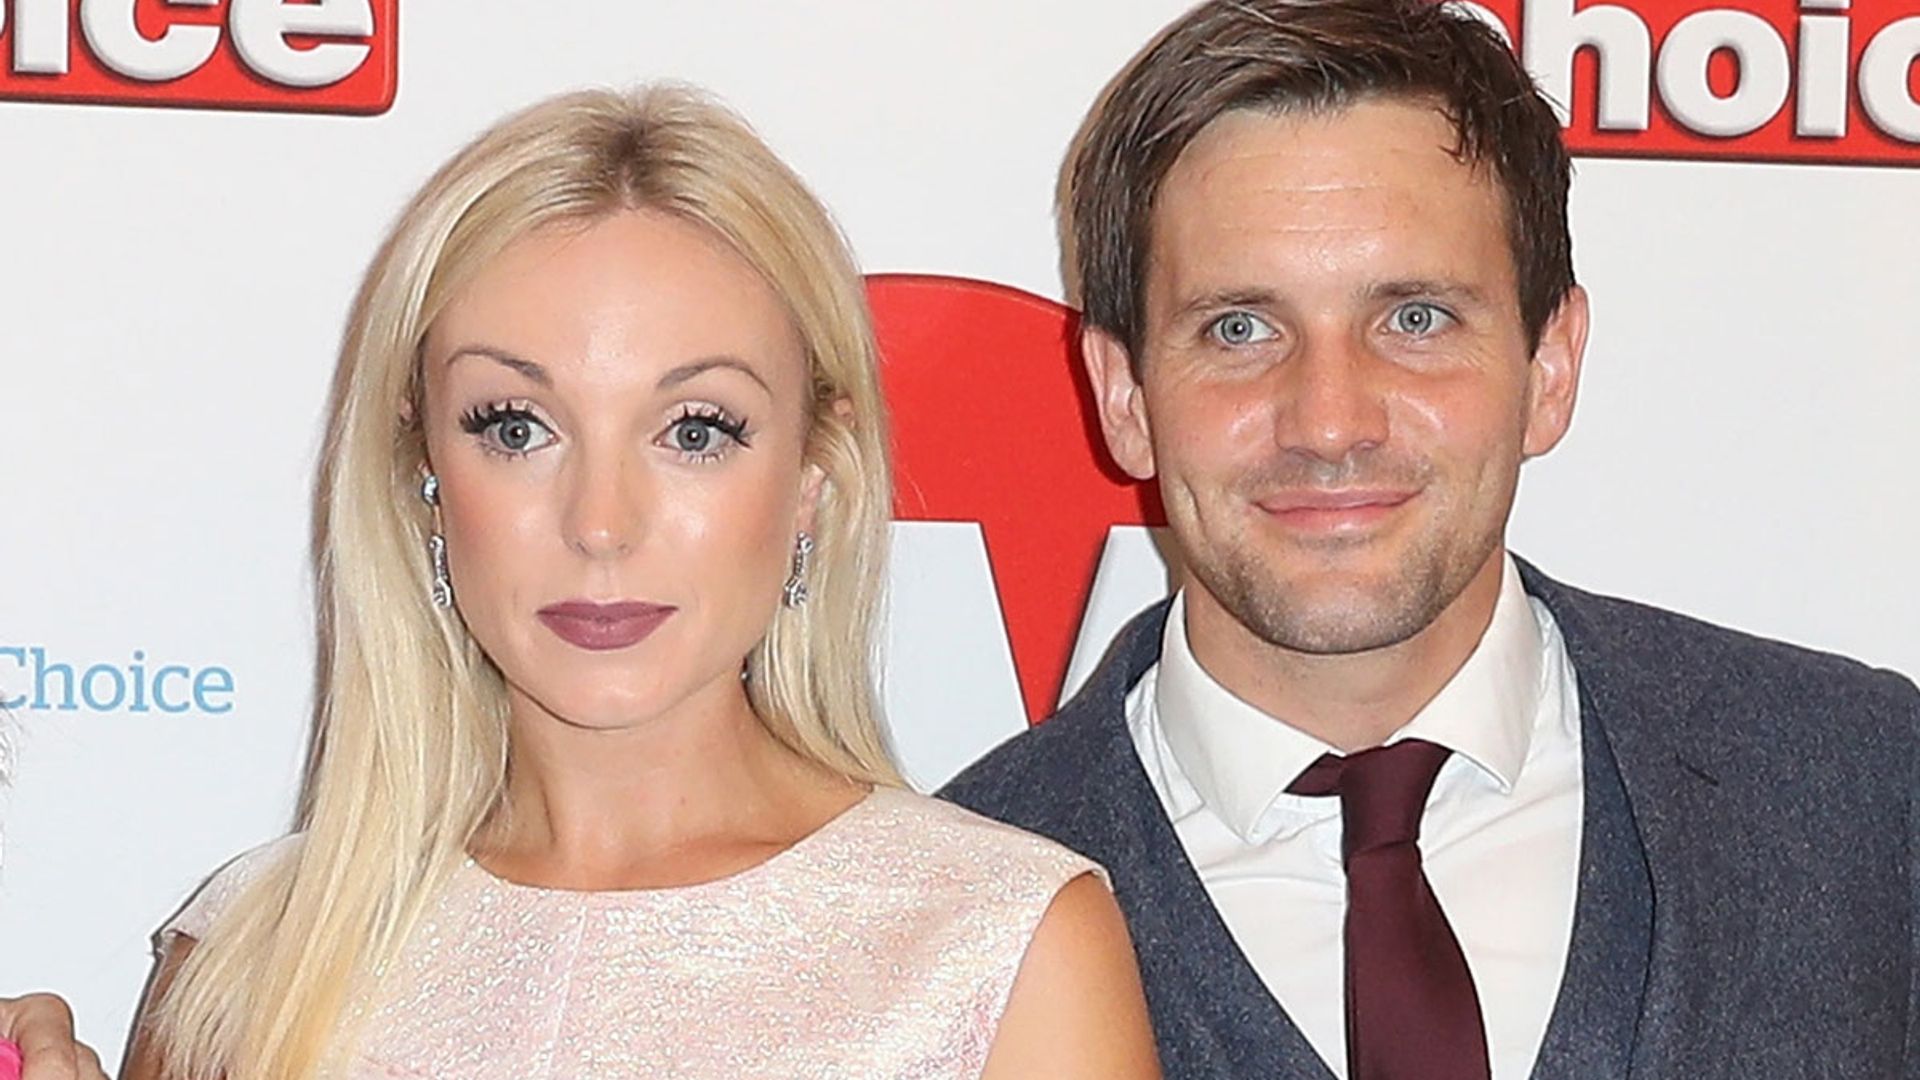 Call The Midwife Star Helen George Shares Photos From When She Met Boyfriend Jack Ashton Hello 0310